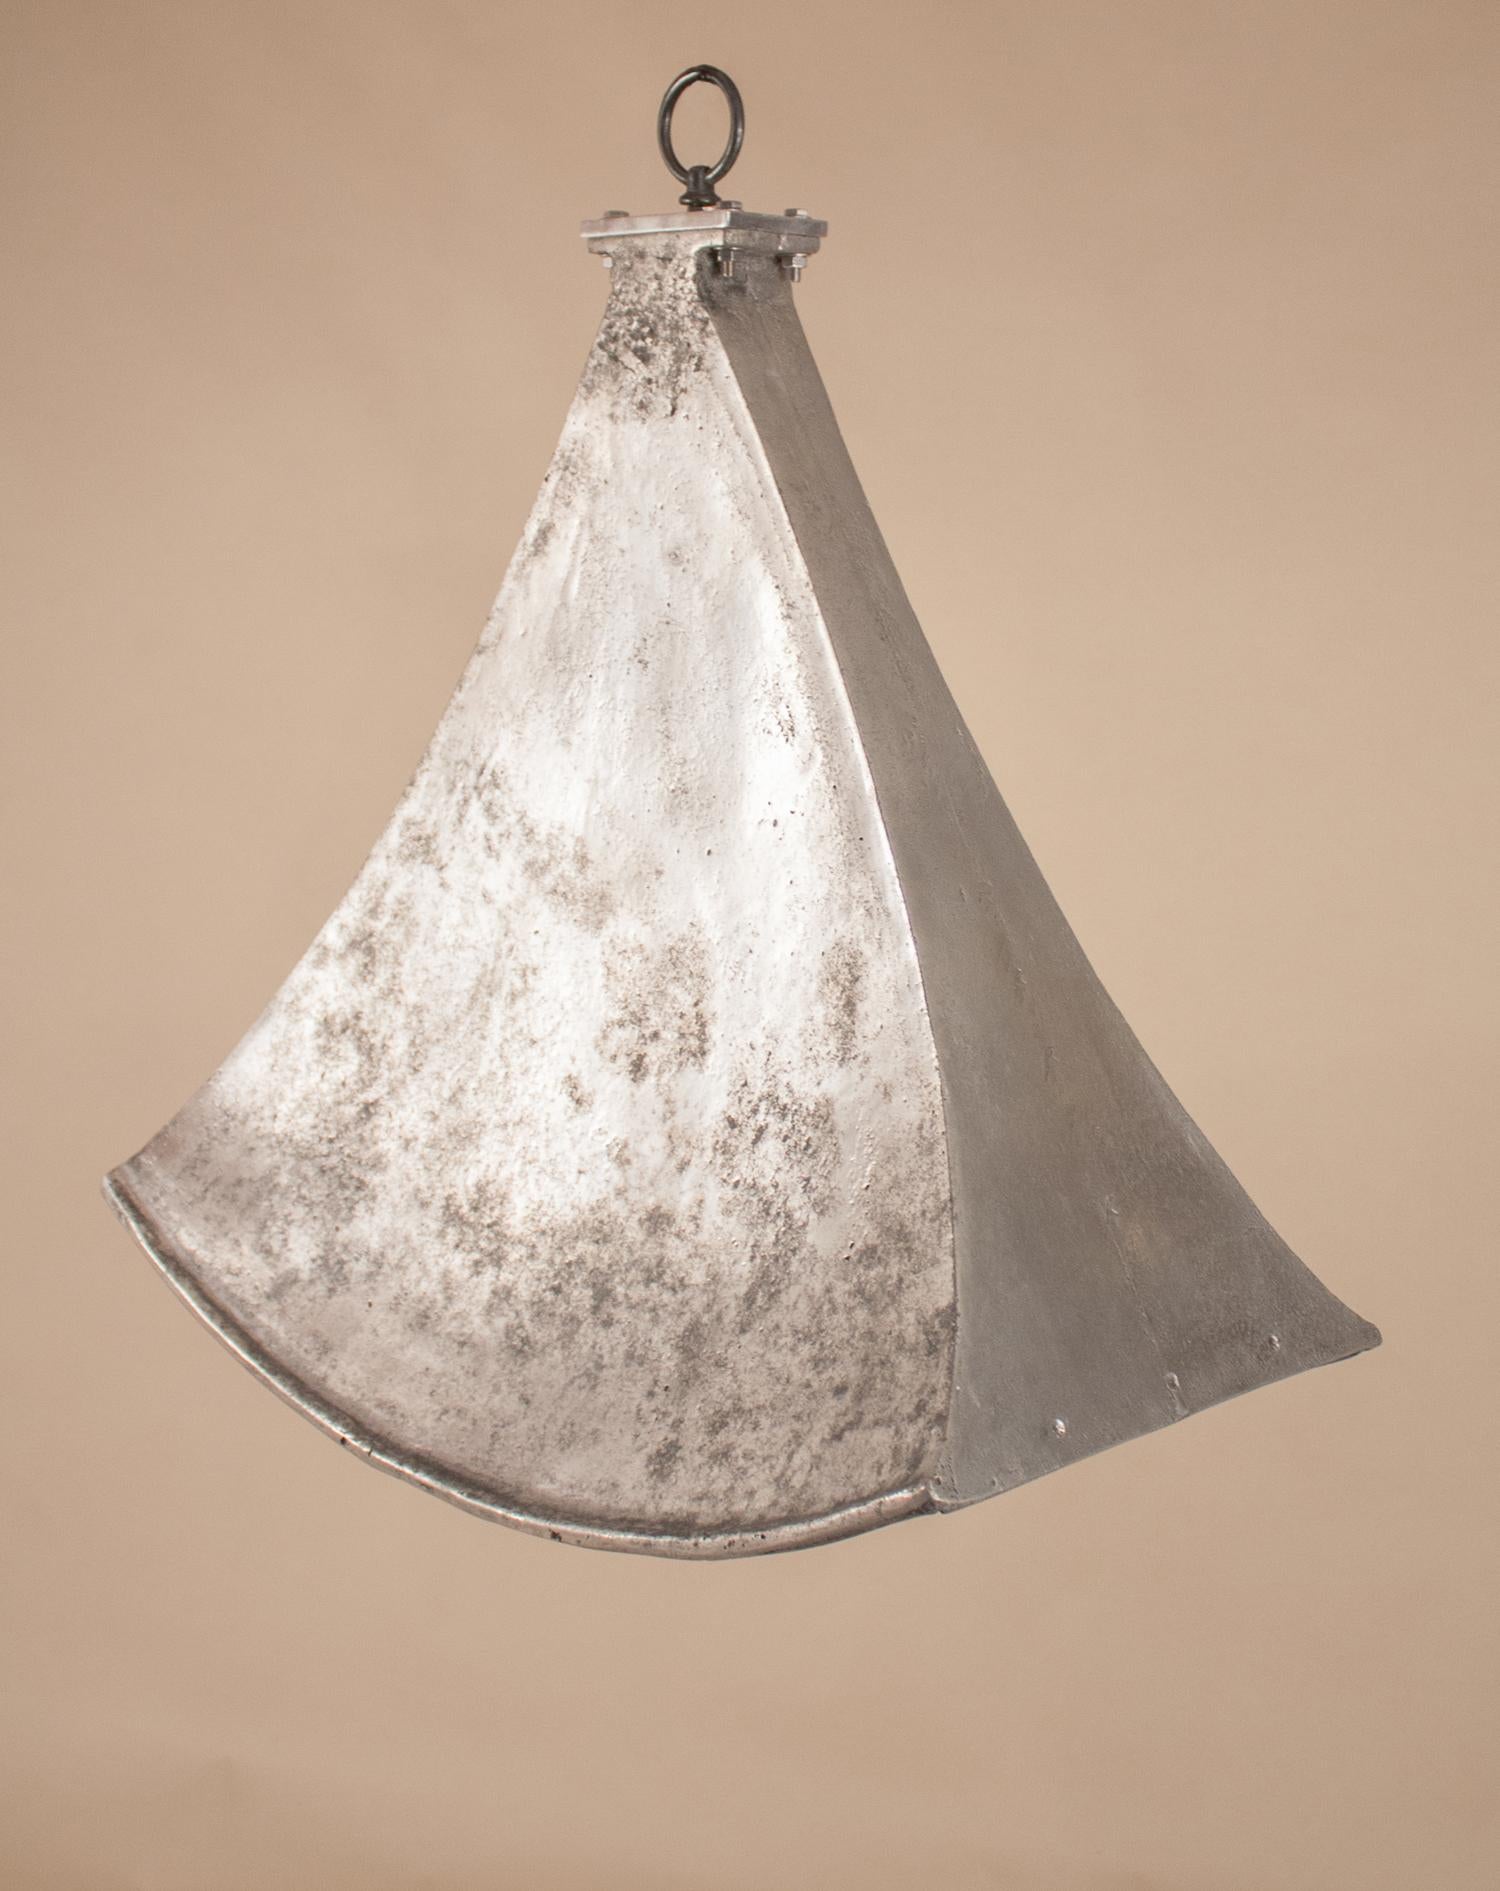 Vintage Aluminum Industrial Pendant Light In Good Condition For Sale In Heath, MA